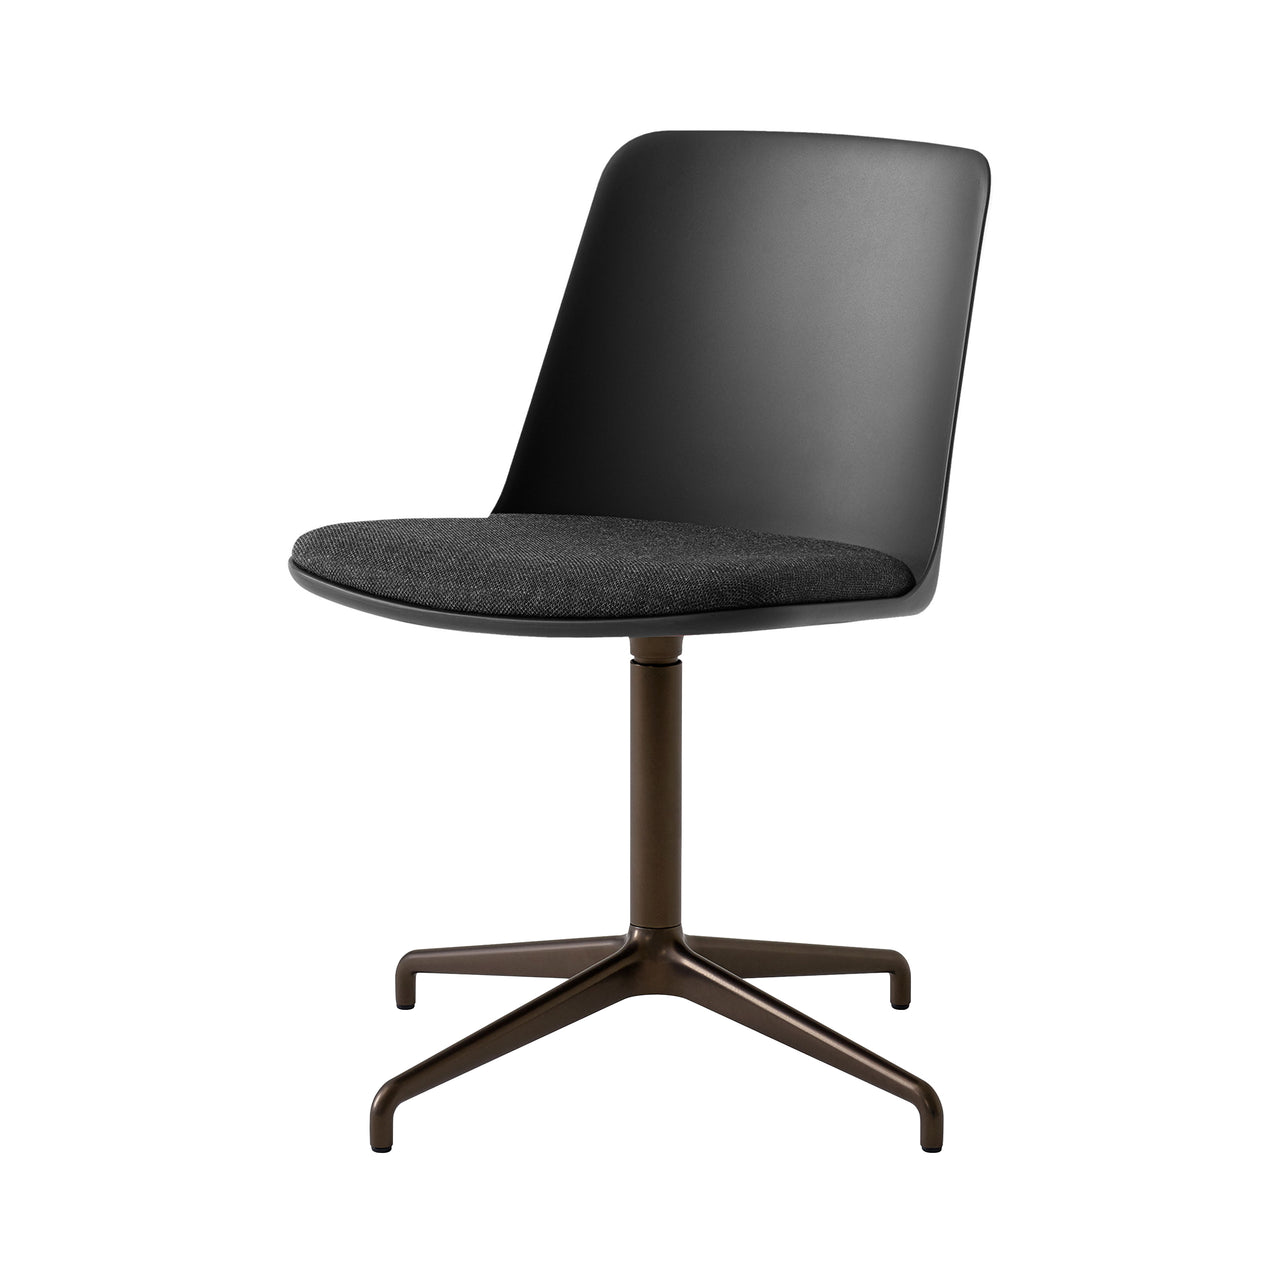 Rely Chair HW12: Black + Bronzed